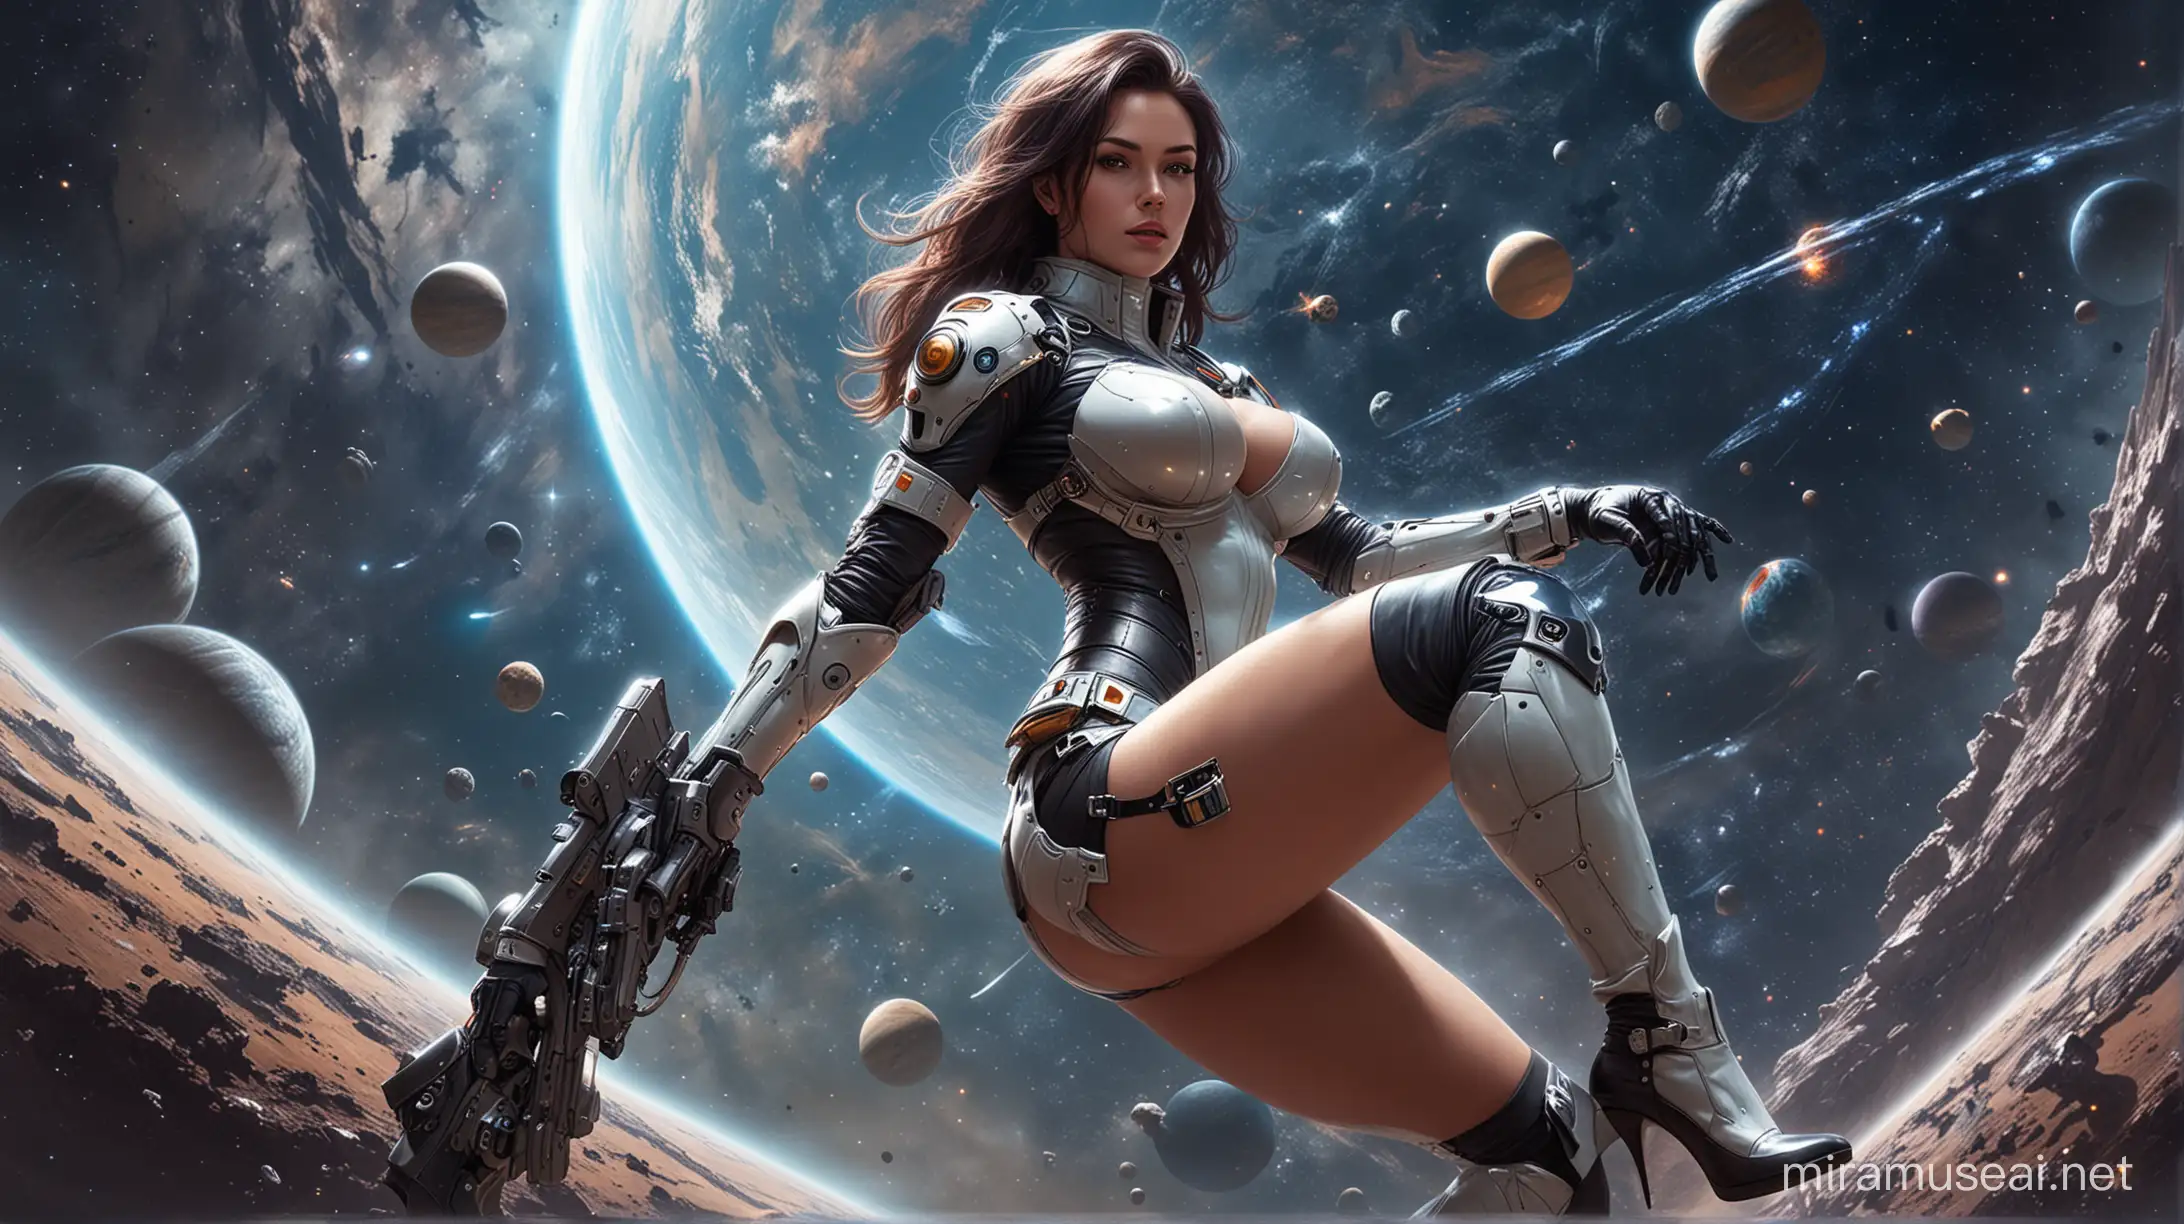 Curvaceous Space Cowgirl in Armored Suit amidst Galactic Wonders